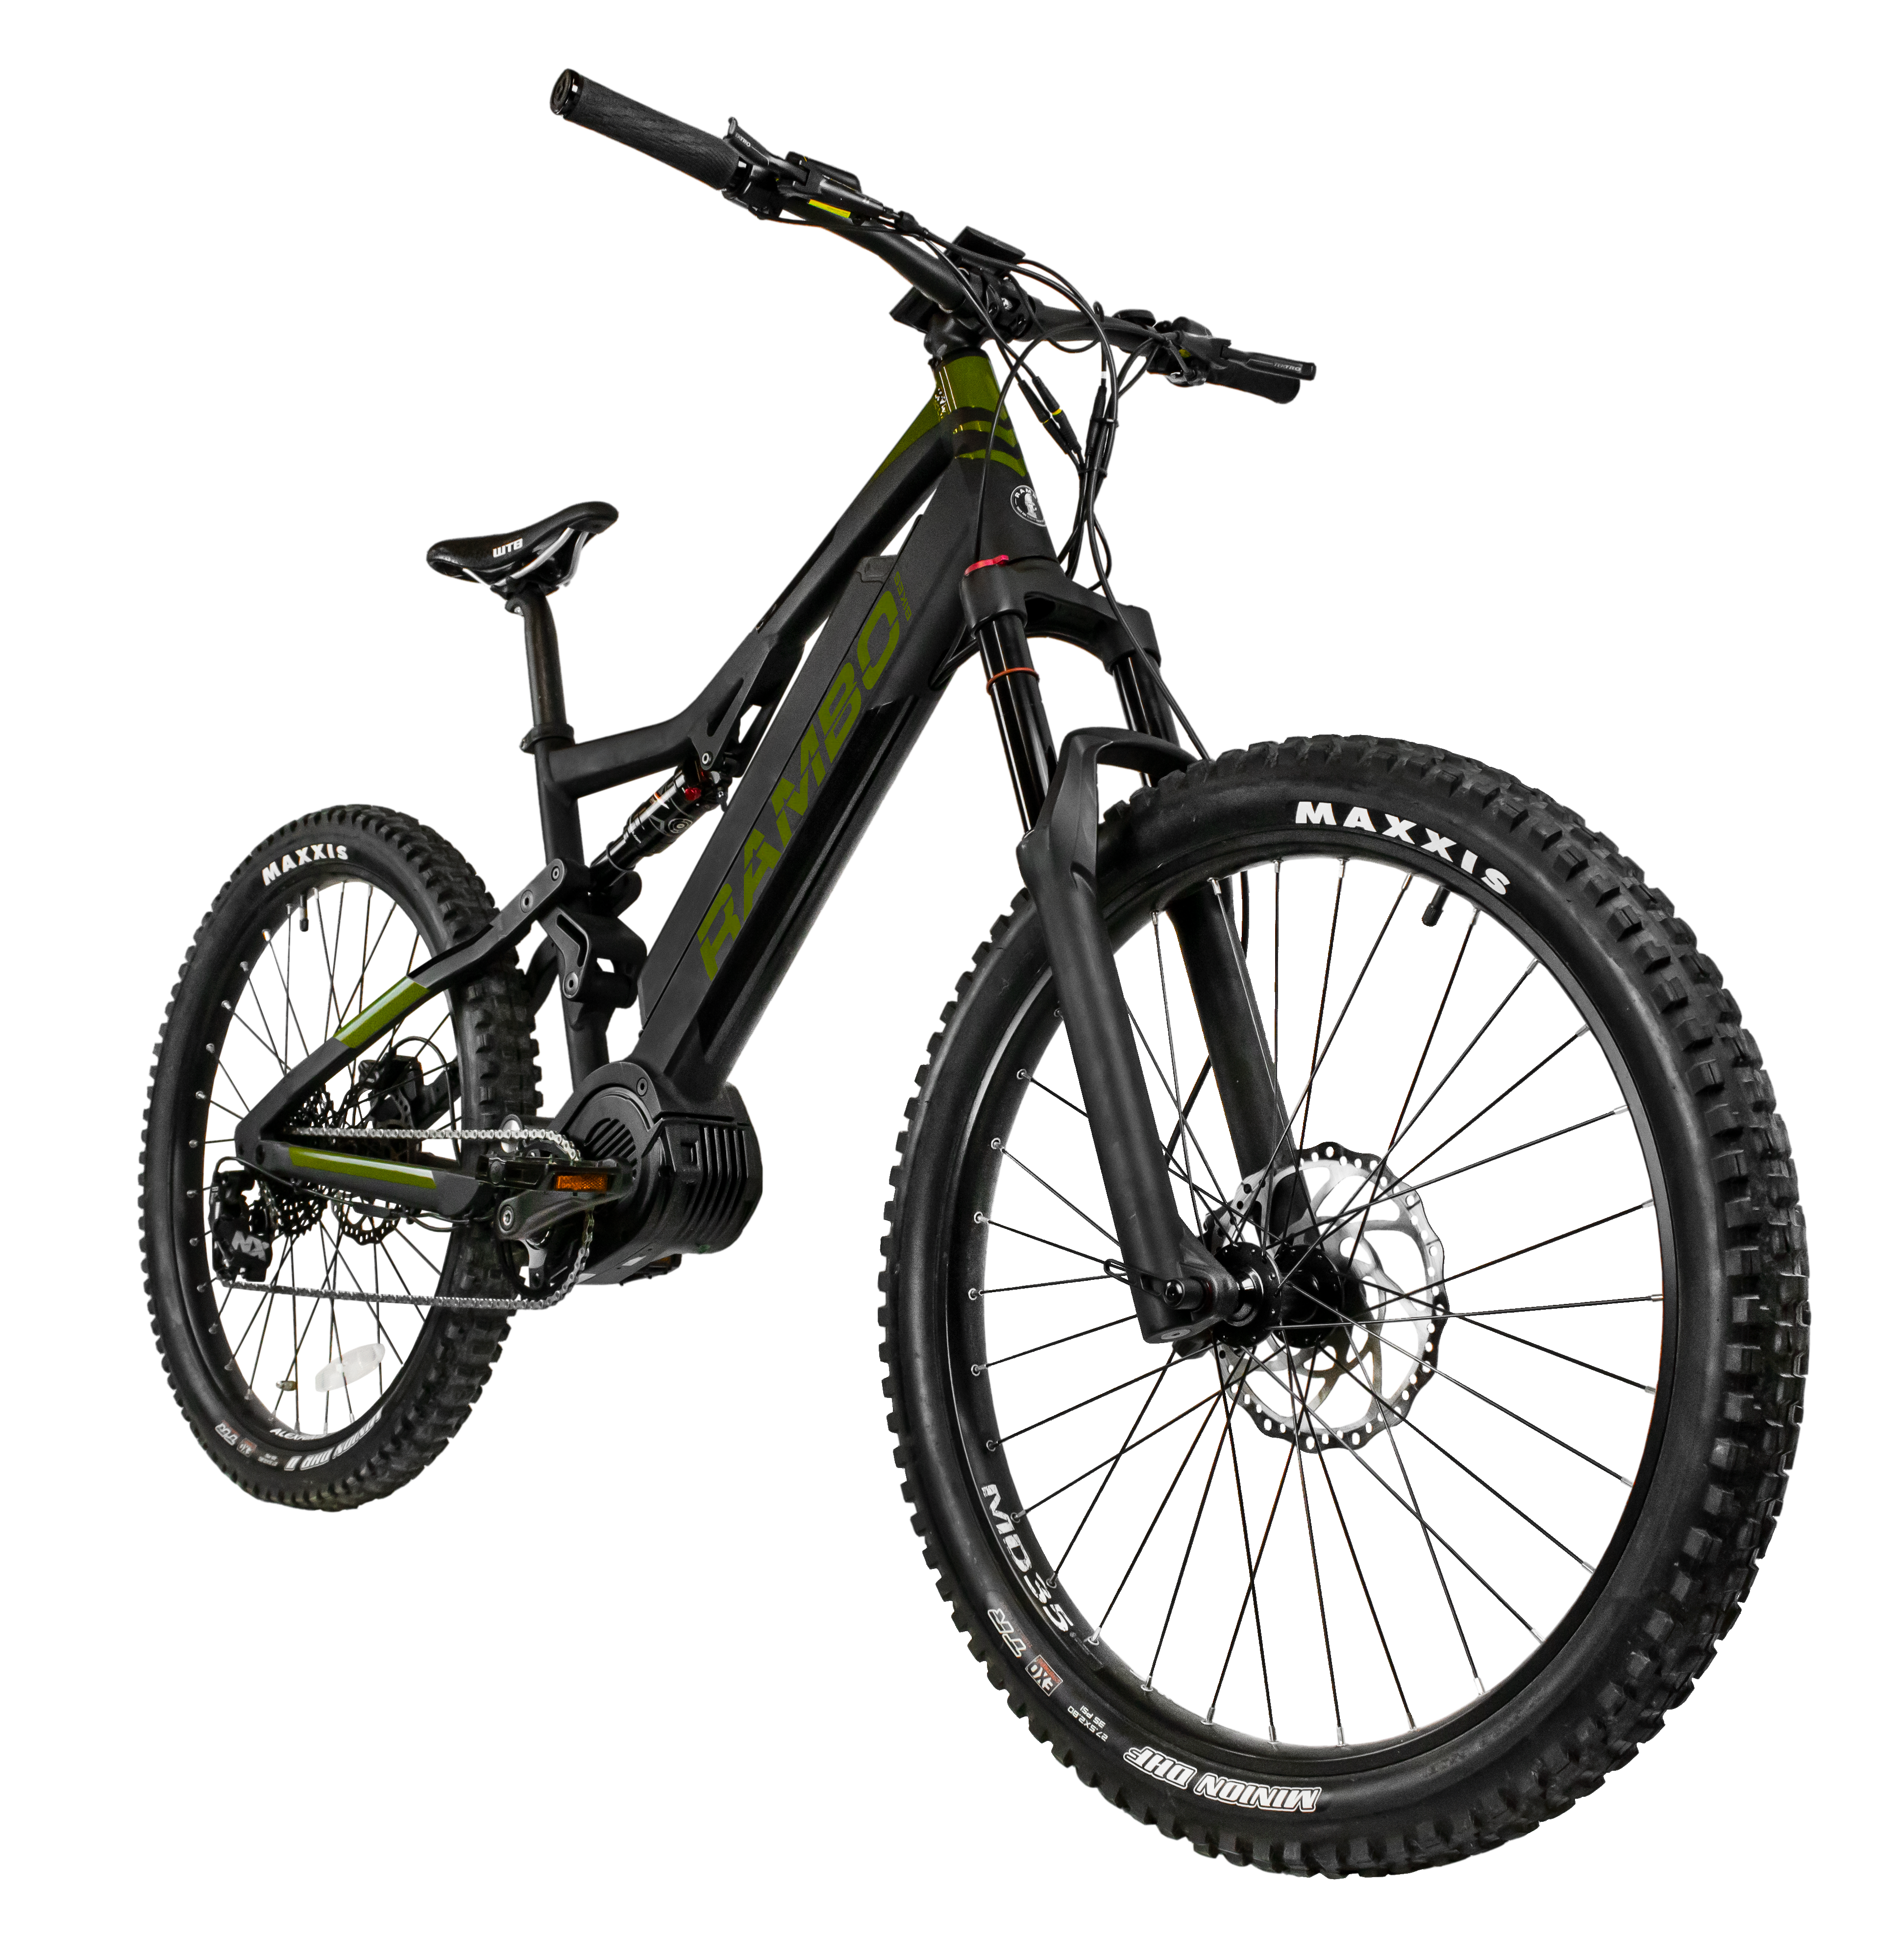 A frontal/side view of The Rampage ebike in black and green.